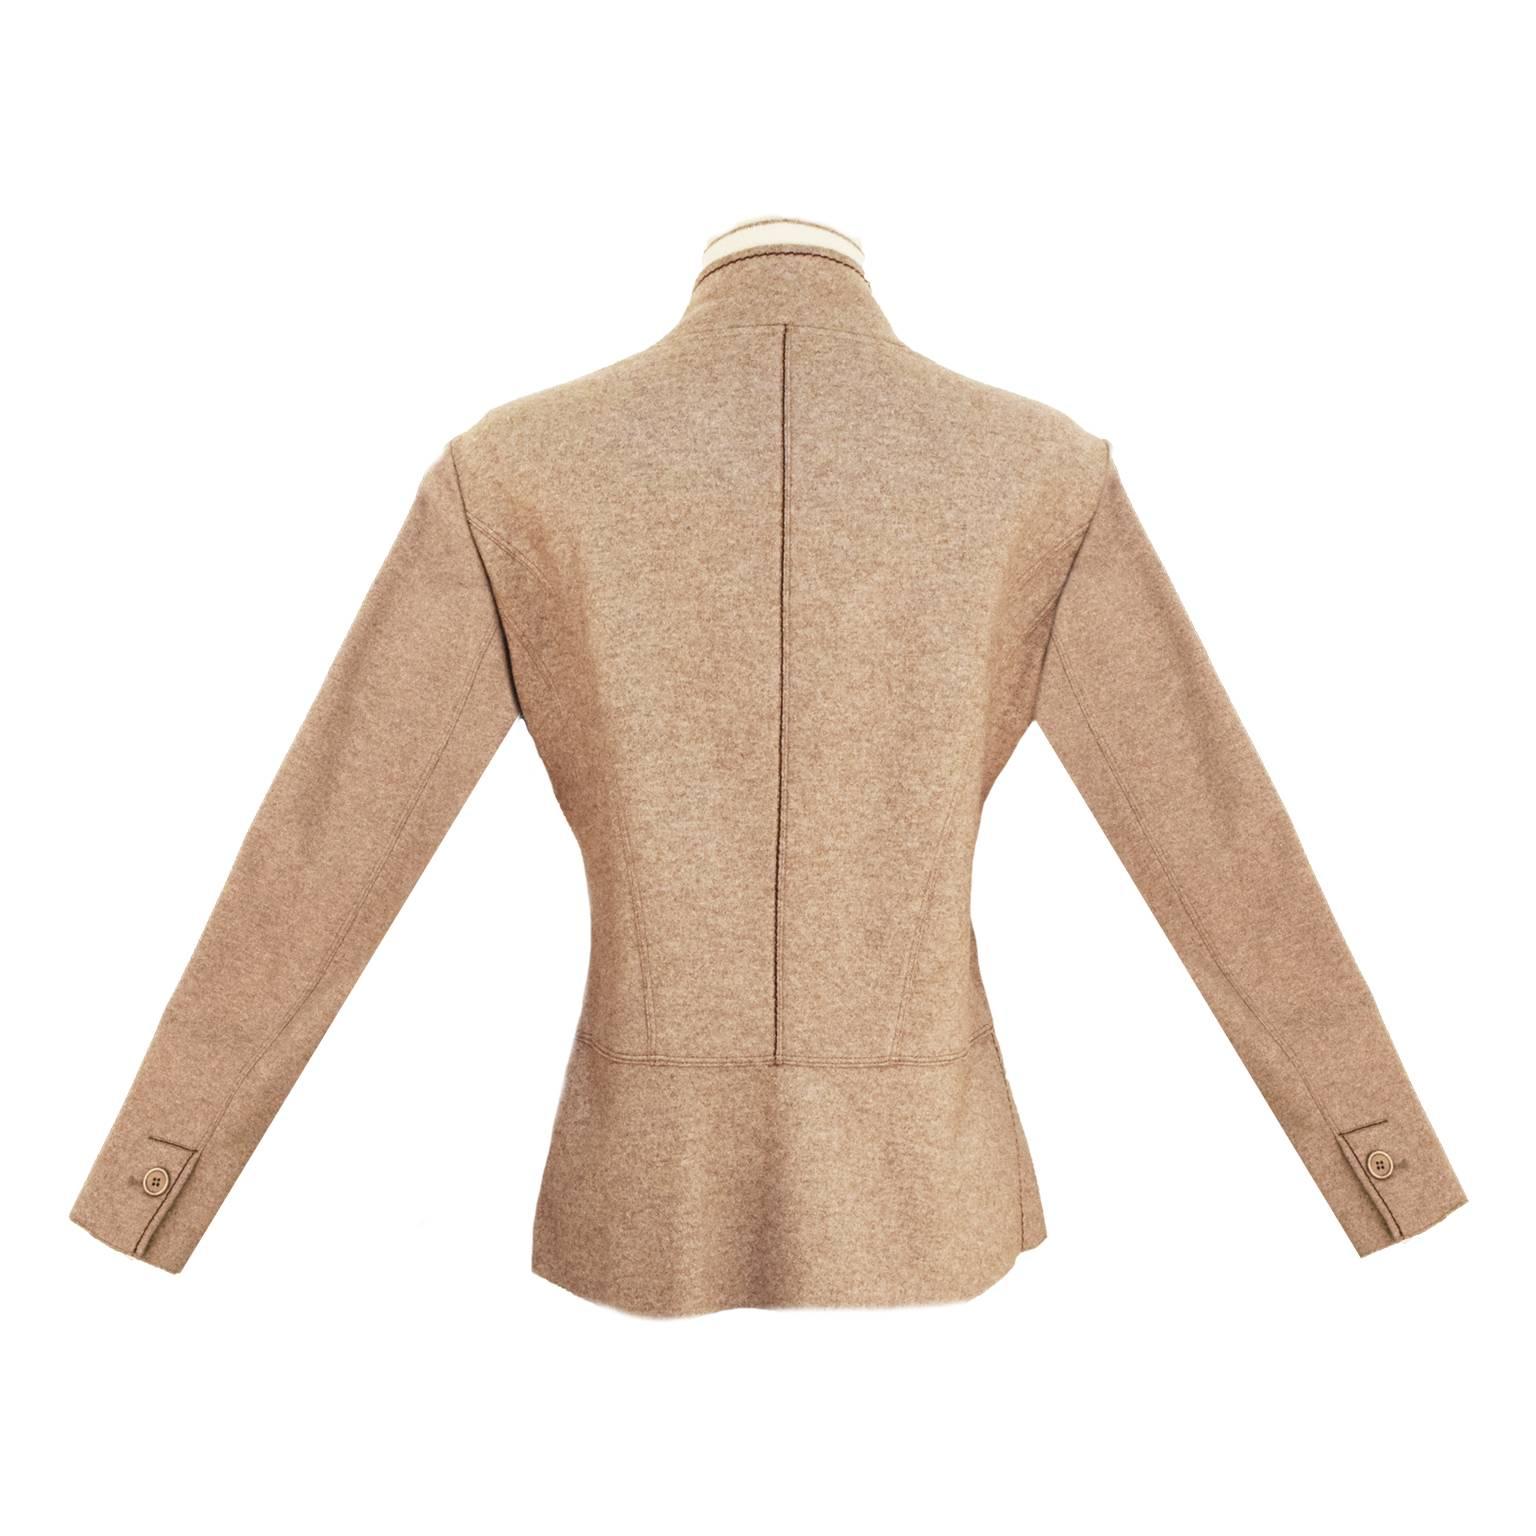 Beautiful, ultra soft brown cashmere and cream layered knit jacket by Brunello Cucinelli. The jacket is single breasted and features curved front piping detail at front, base and on back of sleeves. Princess lines through back. 3 button closure. 